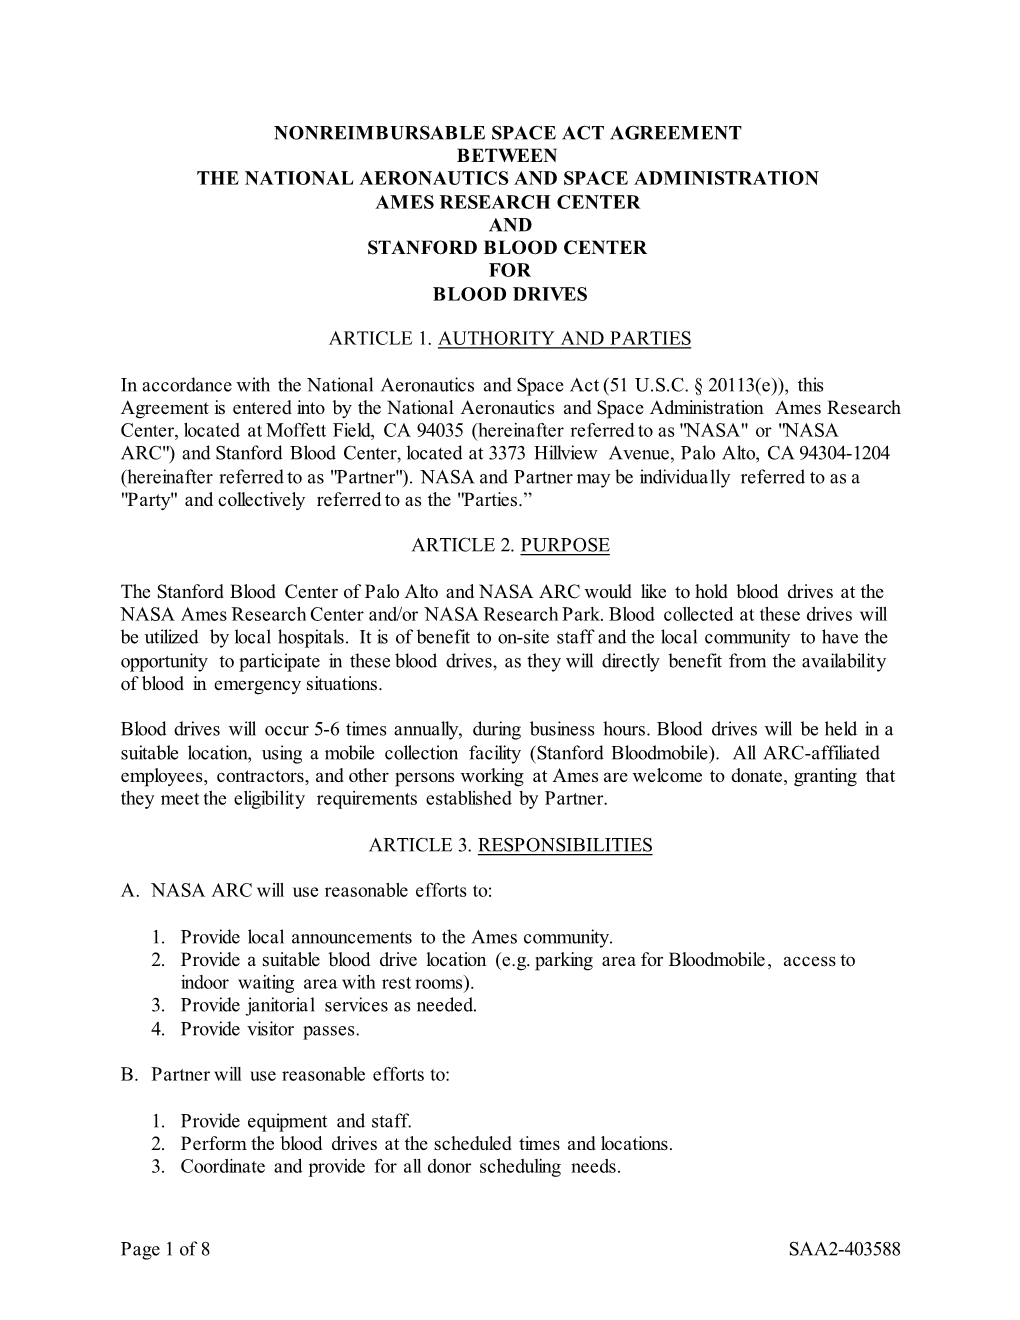 SAA2-403588 Page 1 of 8 NONREIMBURSABLE SPACE ACT AGREEMENT BETWEEN the NATIONAL AERONAUTICS and SPACE ADMINISTRATION AMES RE